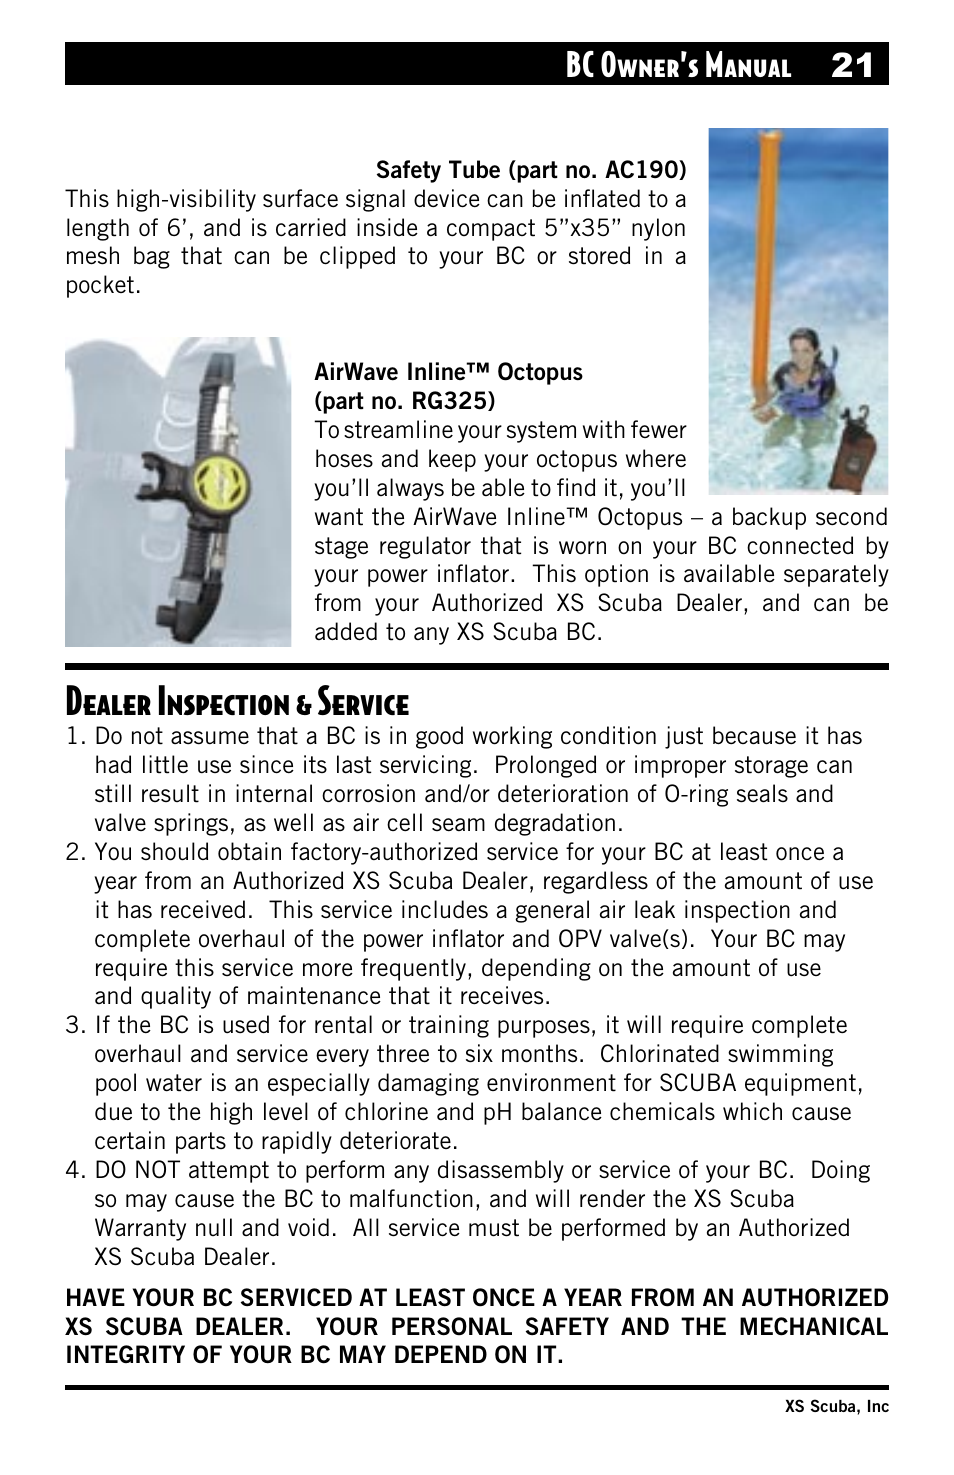 Airwave inline™ octopus (p/n rg325), Safety tube (p/n ac190), Dealer inspection & service | Bc owner’s manual 21 | XS Scuba Buoyancy Compensator User Manual | Page 21 / 24